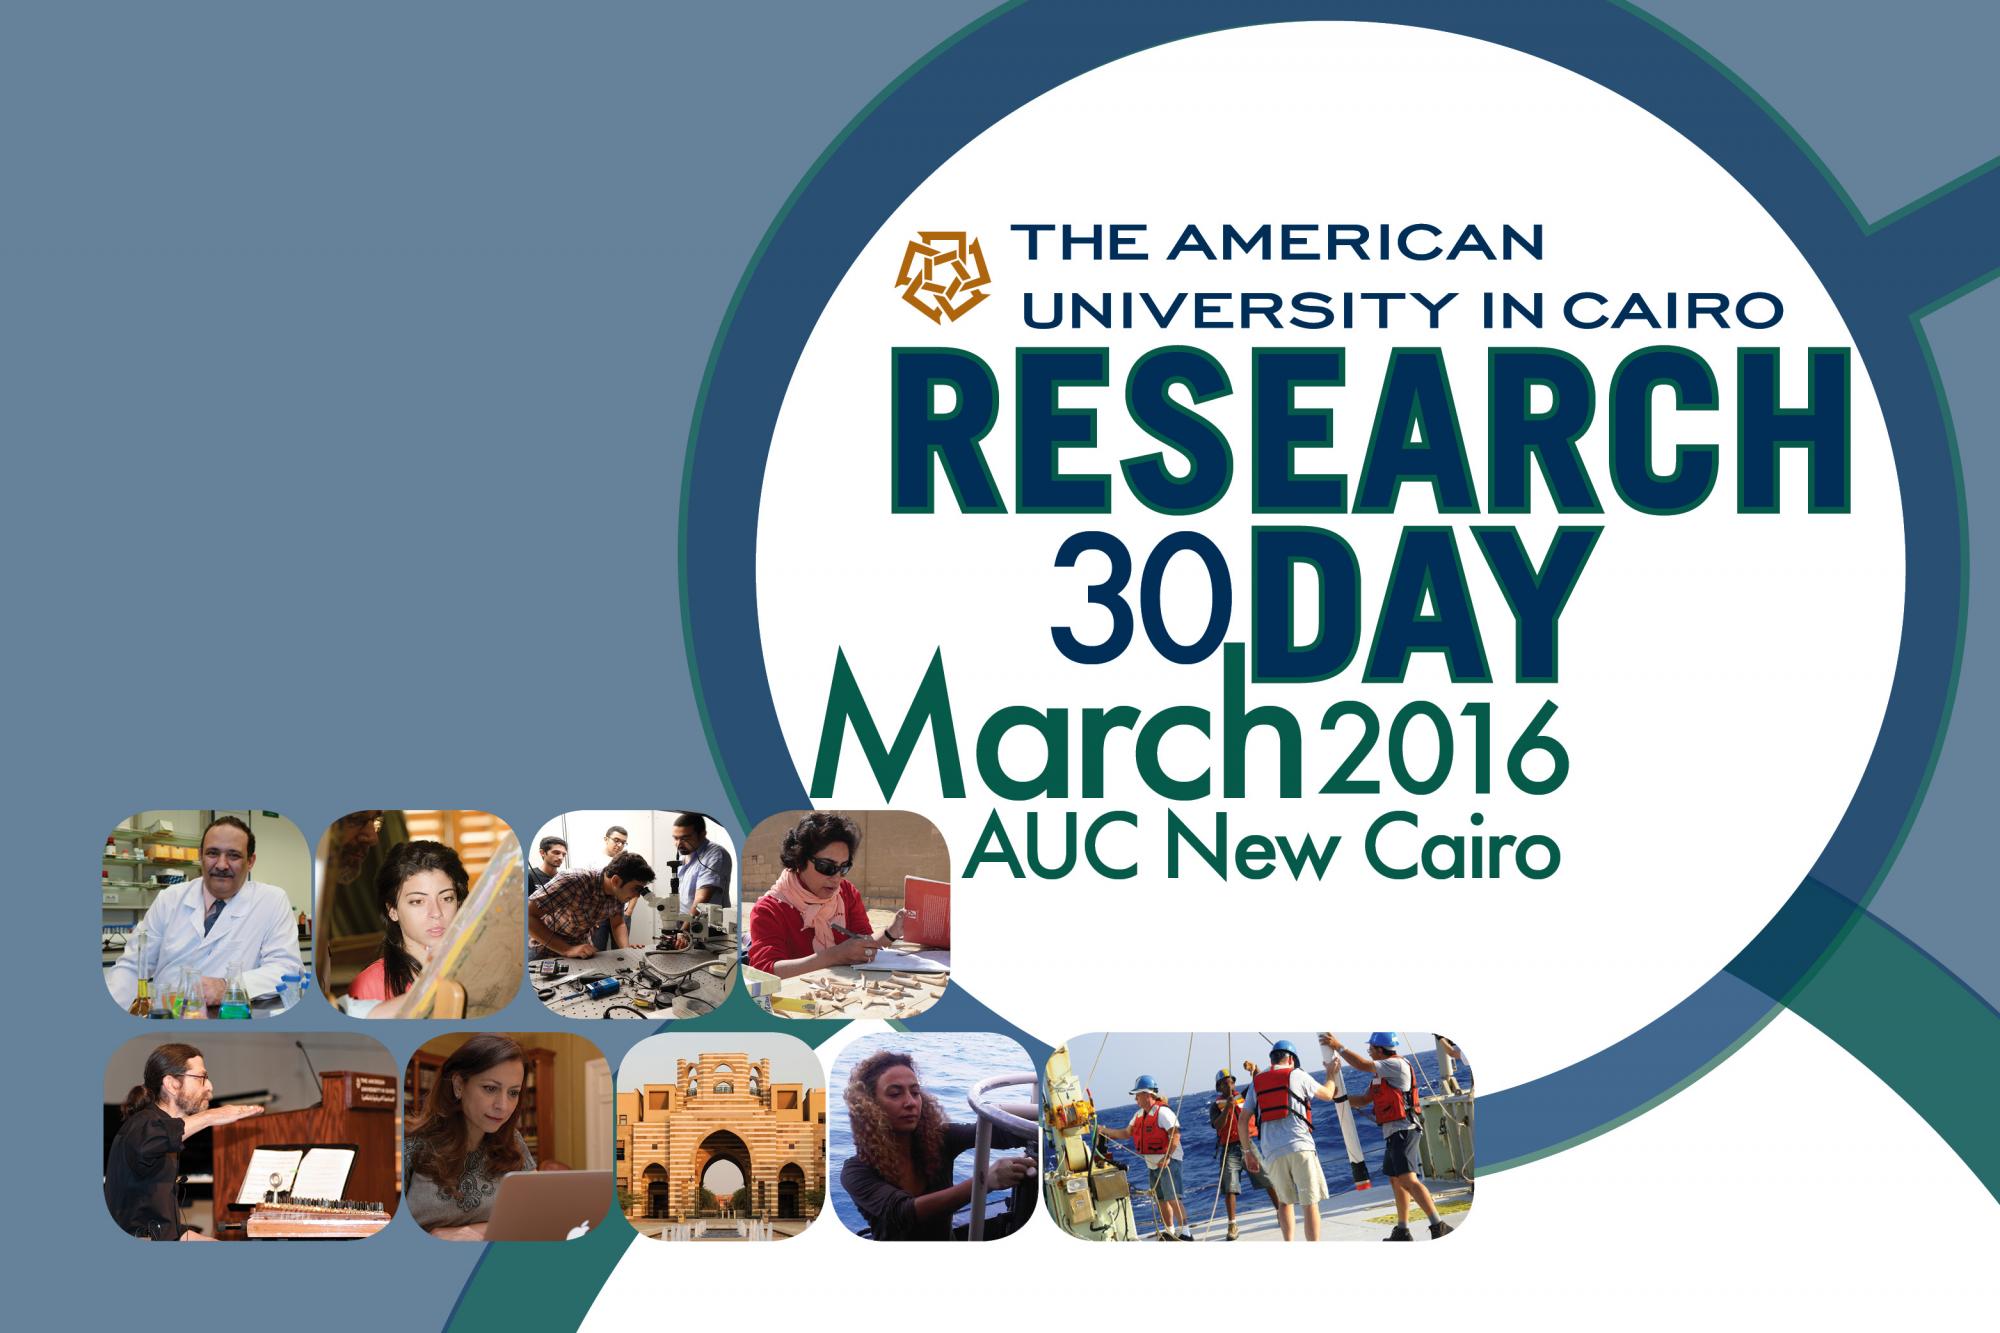 AUC will host it's first Research Day on March 30